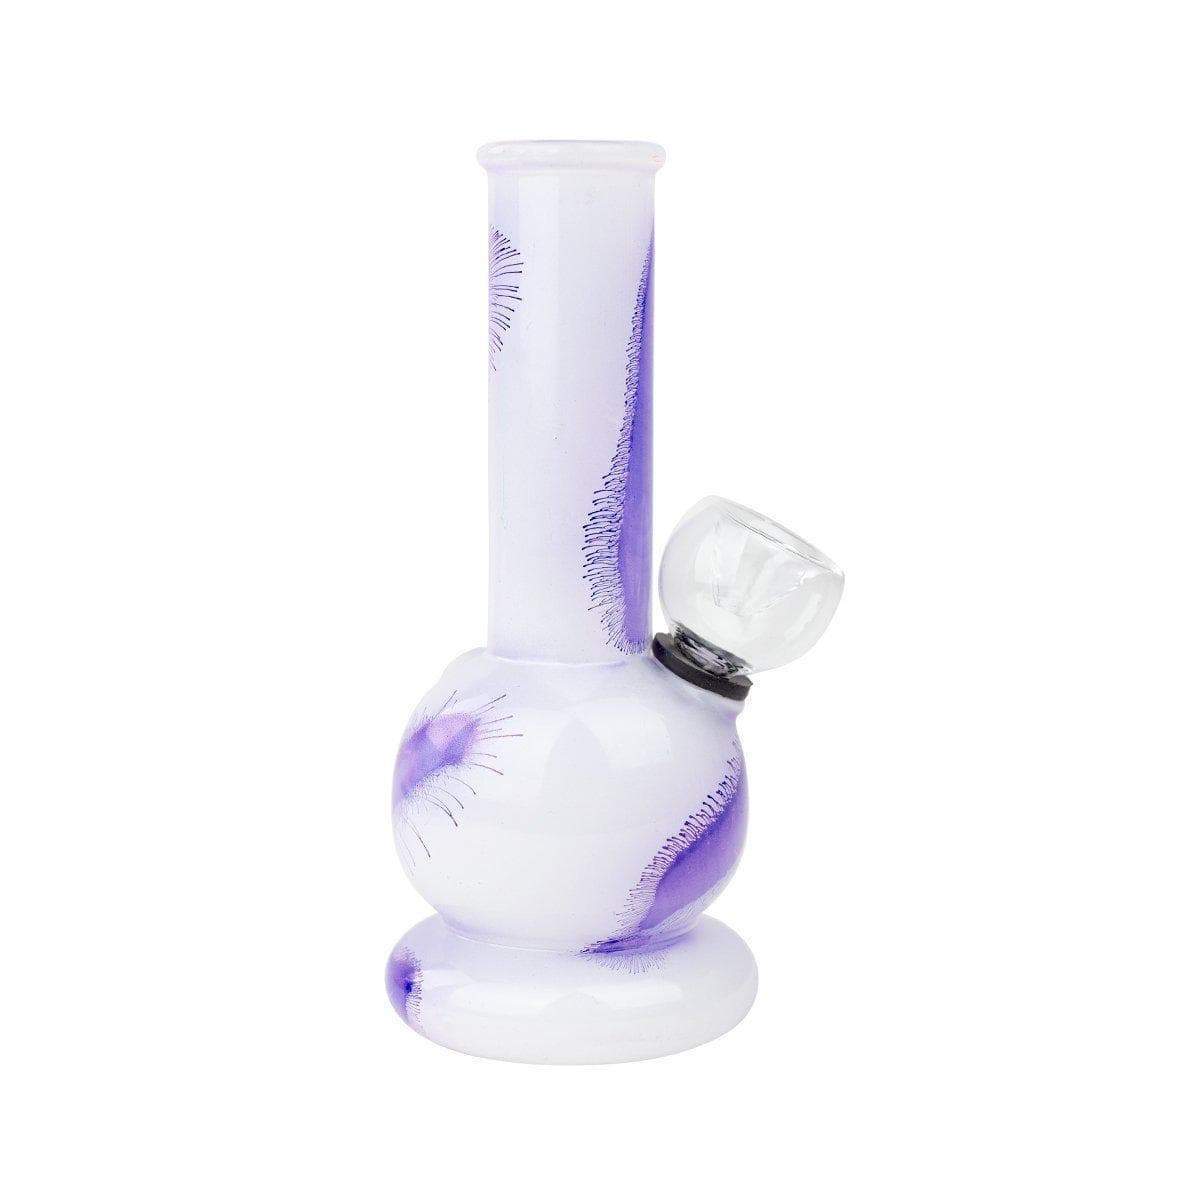 5-inch glass carbed bong smoking device swirl frosted purple and white Eukaryote nucleus science molecule design two-layers base